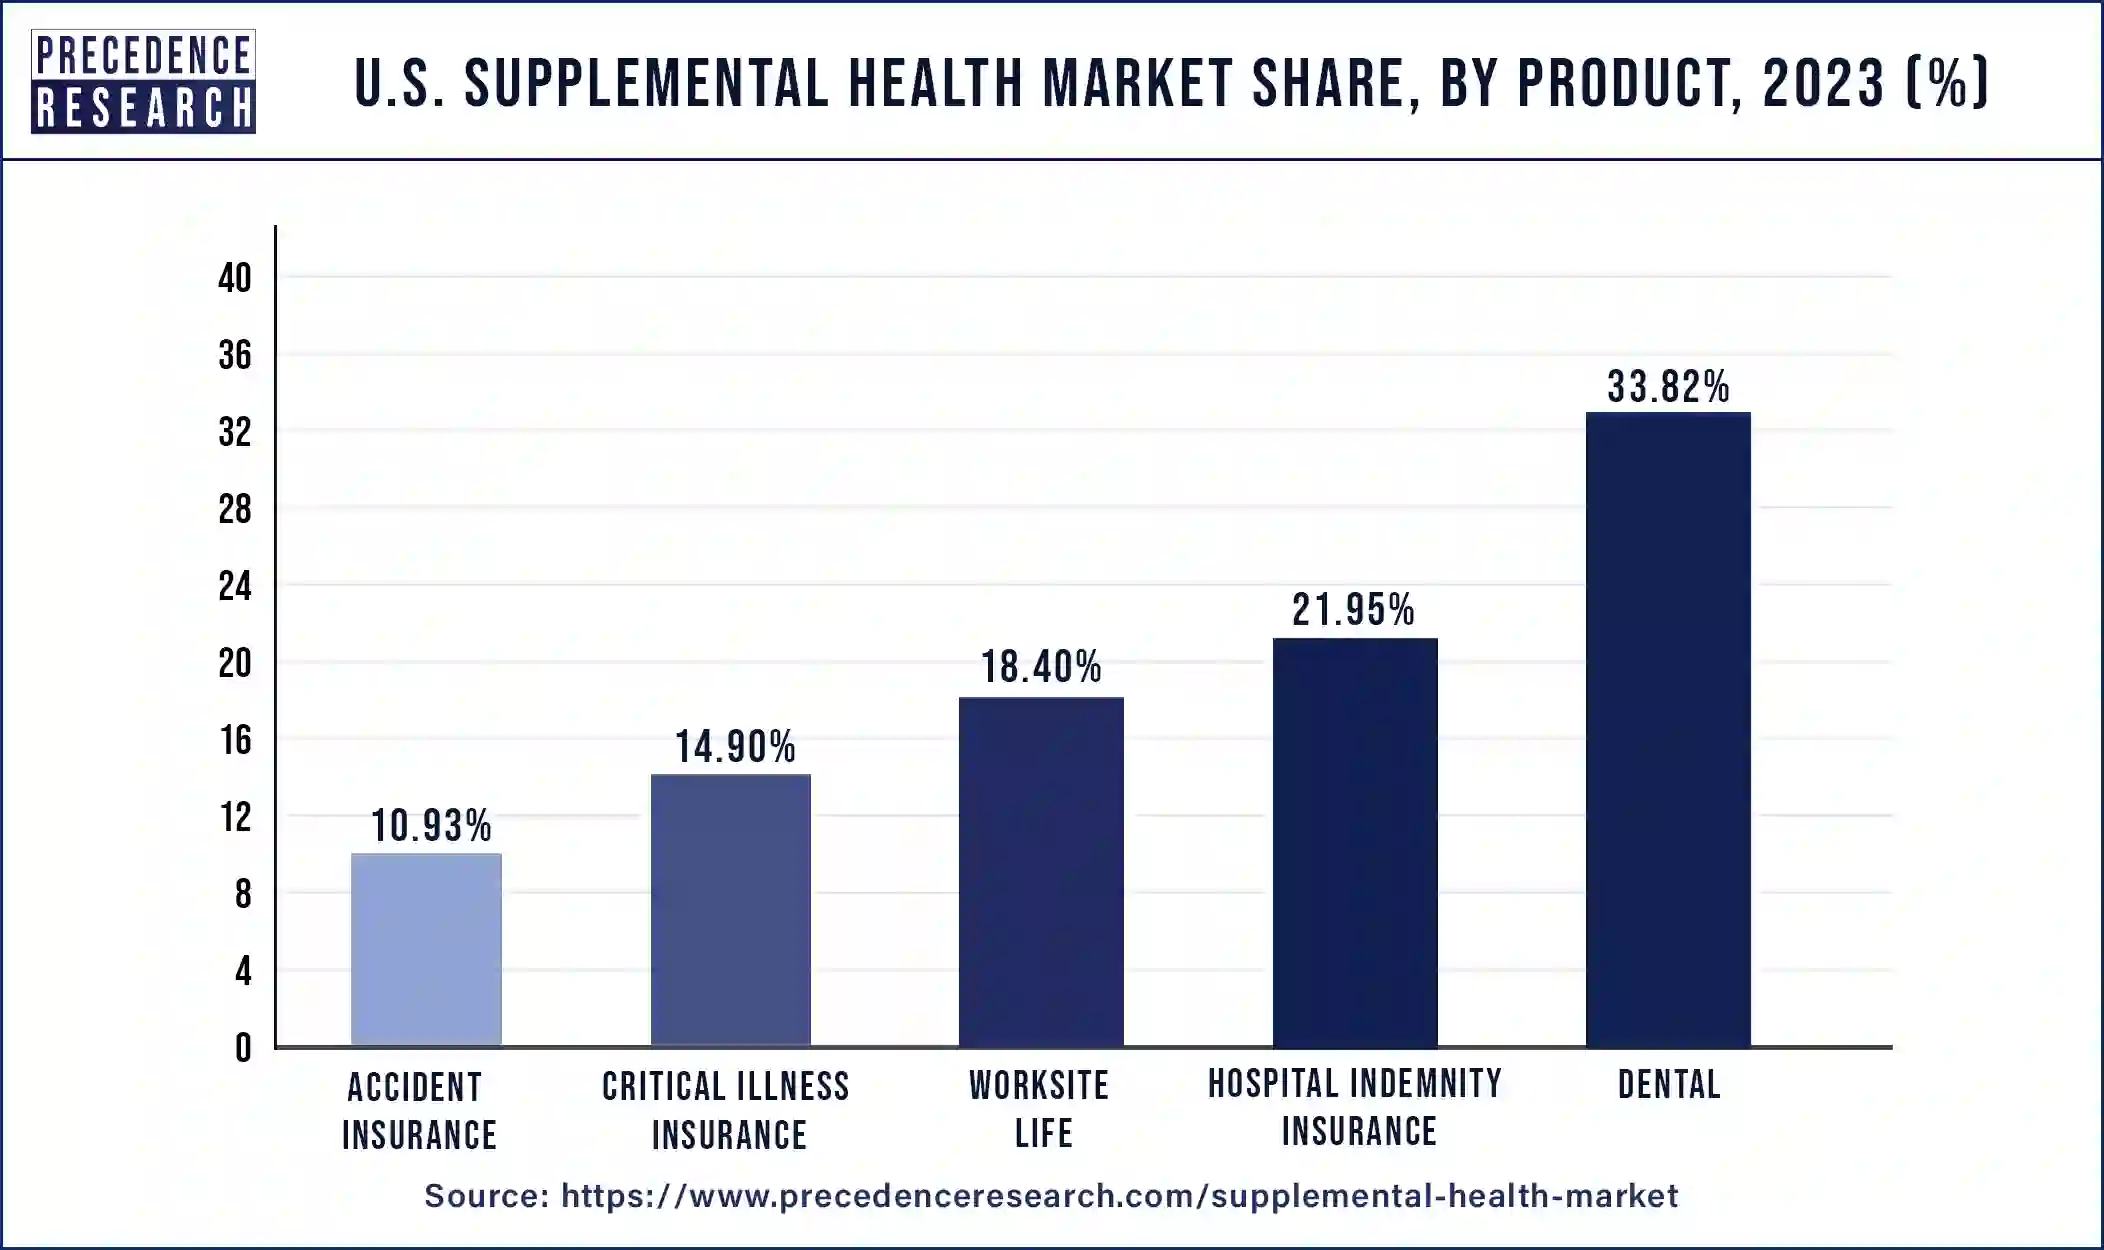 U.S. Supplemental Health Market Share, By Product, 2023 (%)